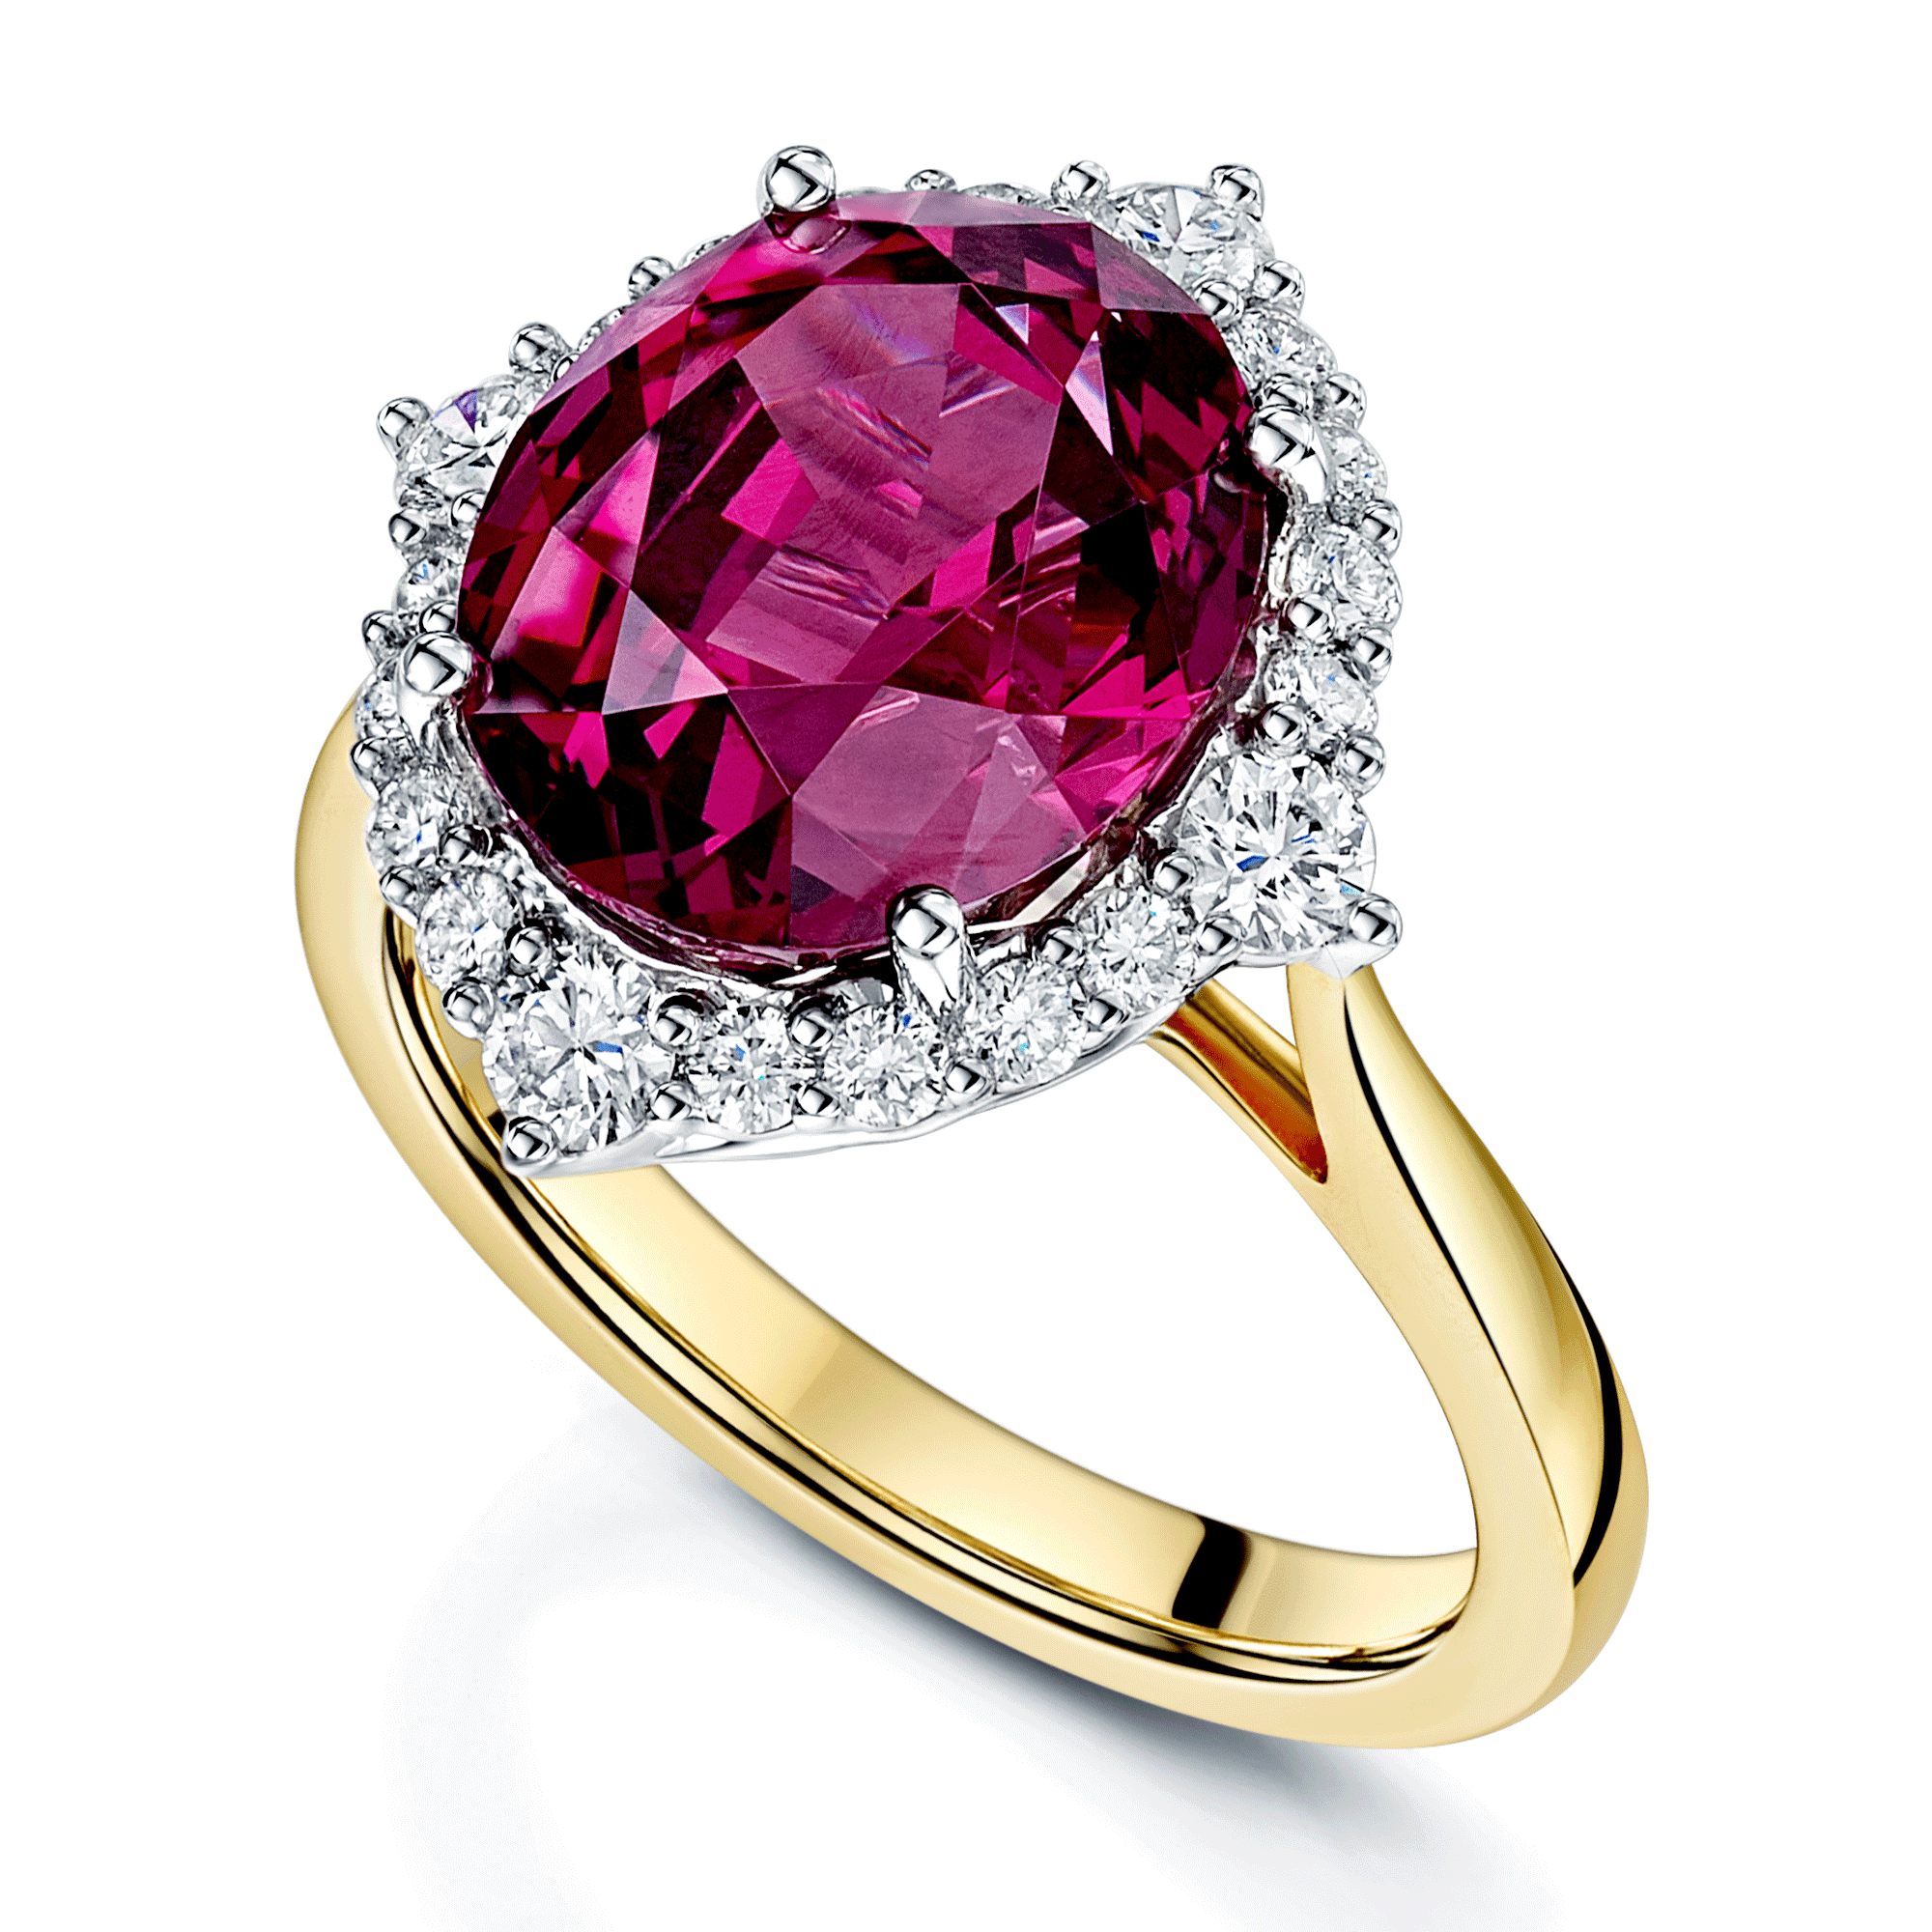 18ct Rose & White Gold Oval Cut Umbalite Garnet In A Diamond Halo Setting Ring